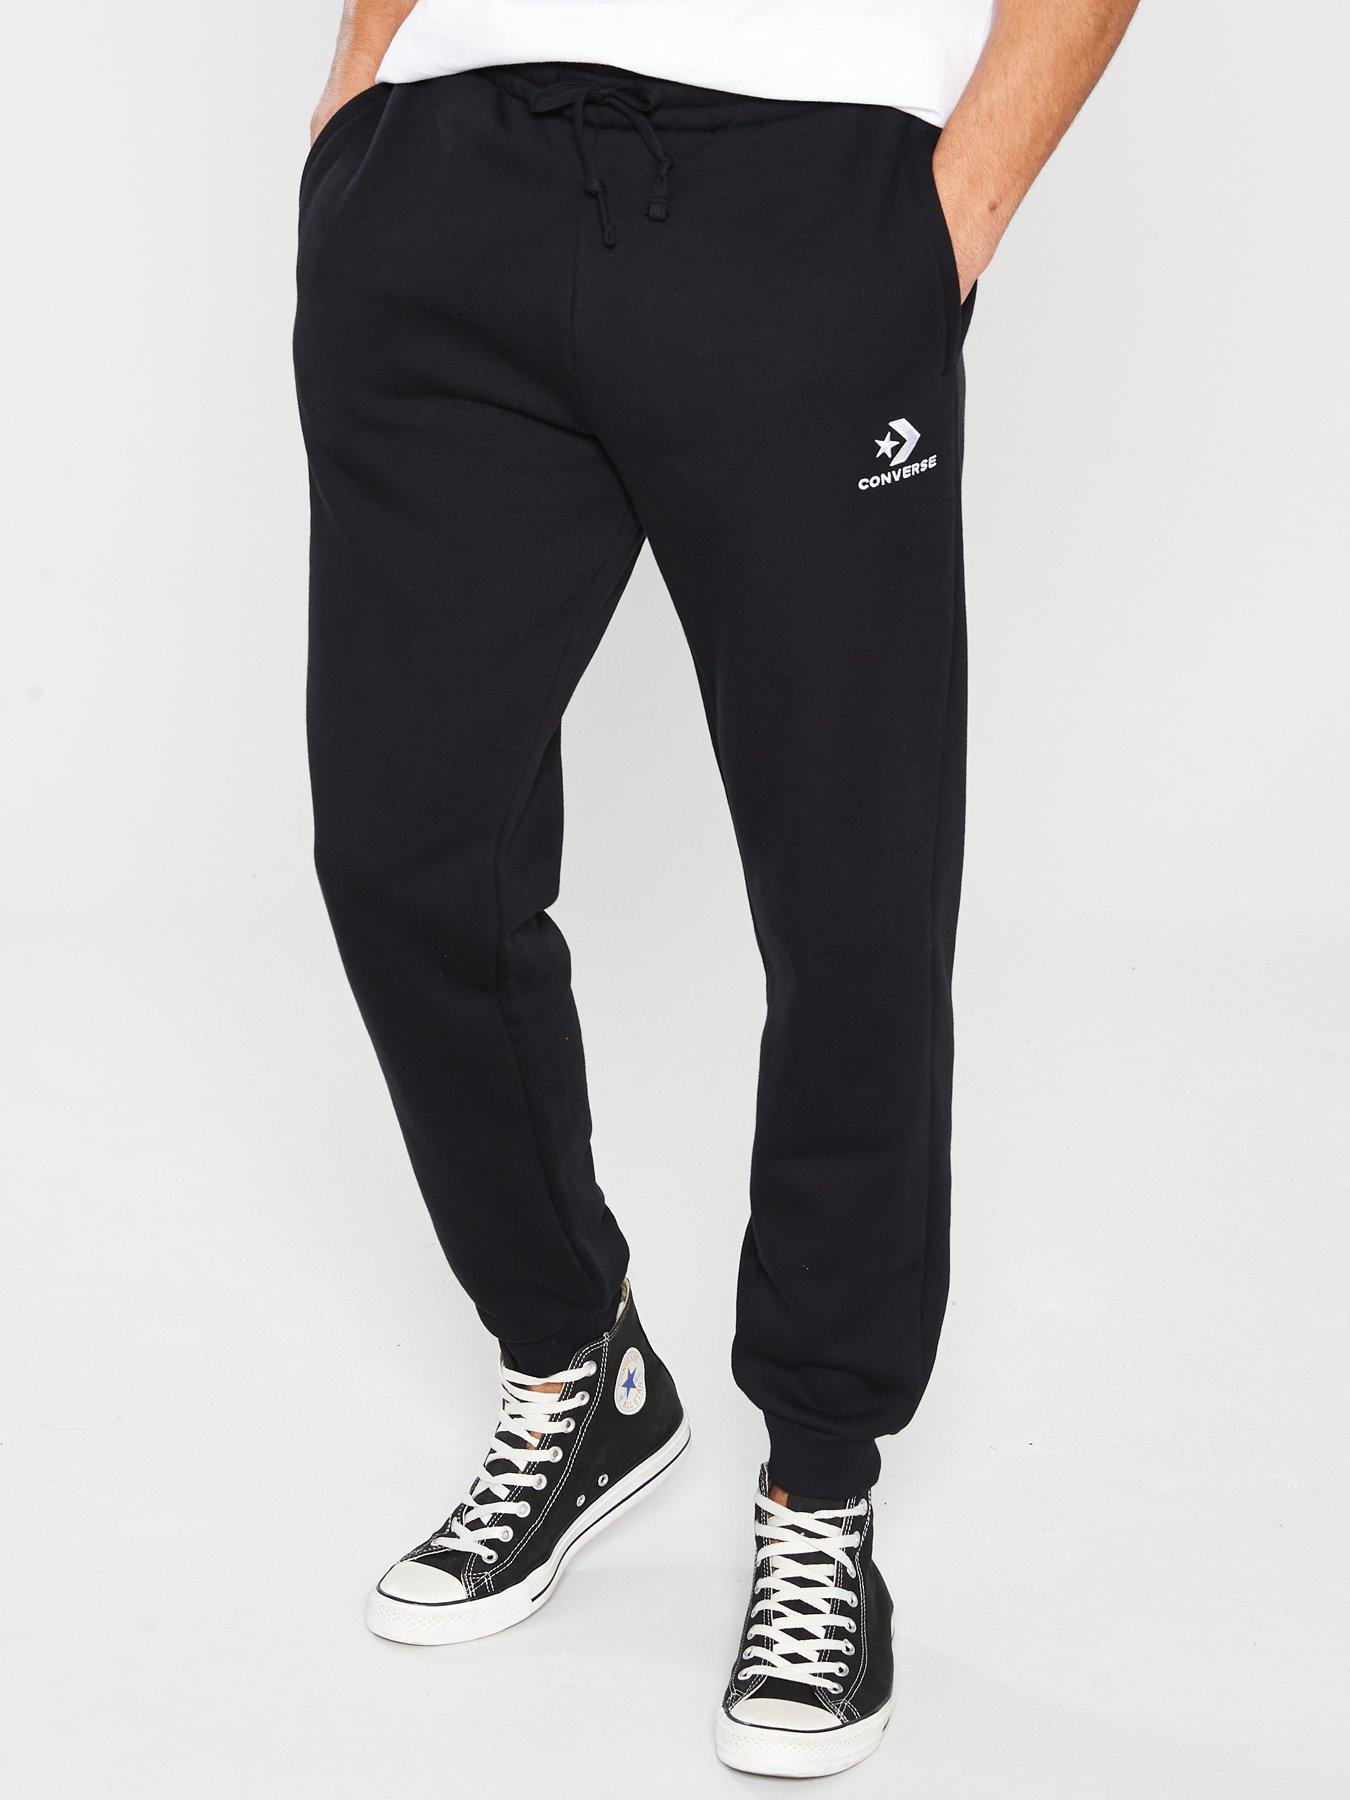 converse tracksuit mens navy